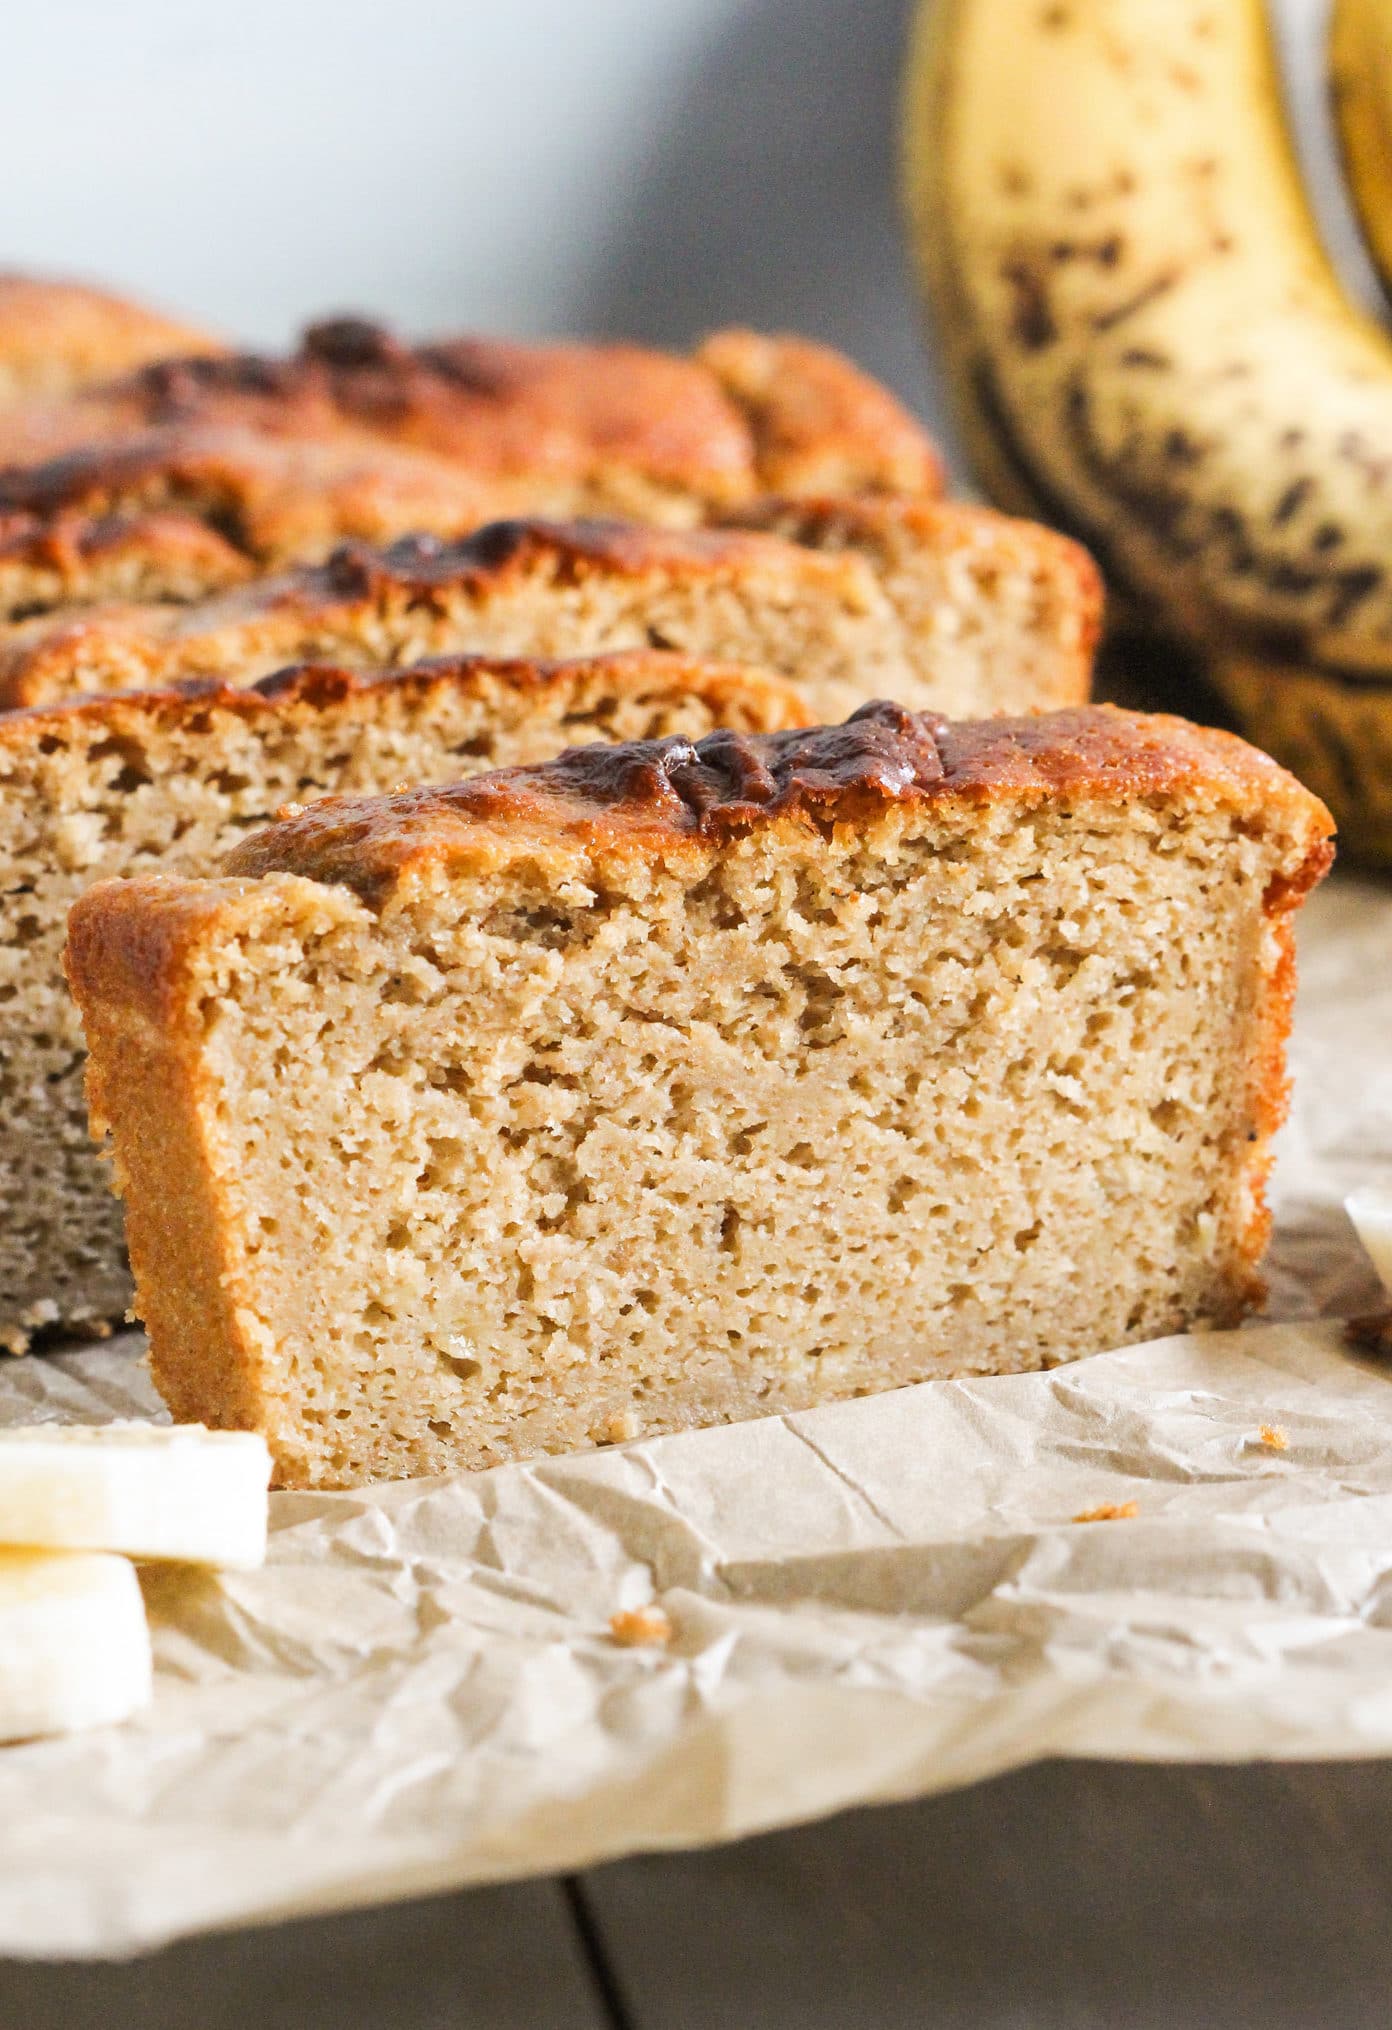 HEALTHY Banana Bread Pound Cake! This moist, buttery, and sweet cake is refined sugar free, low fat, high protein, and 100% whole grain! It tastes like it's from a bakery. A thick slice has just 190 calories and 5g of fat, plus 8g of protein and 3g of fiber, with no butter or white sugar in sight! Healthy Dessert Recipes with low calorie, low carb, gluten free, dairy free, and vegan options at the Desserts With Benefits Blog (www.DessertsWithBenefits.com)